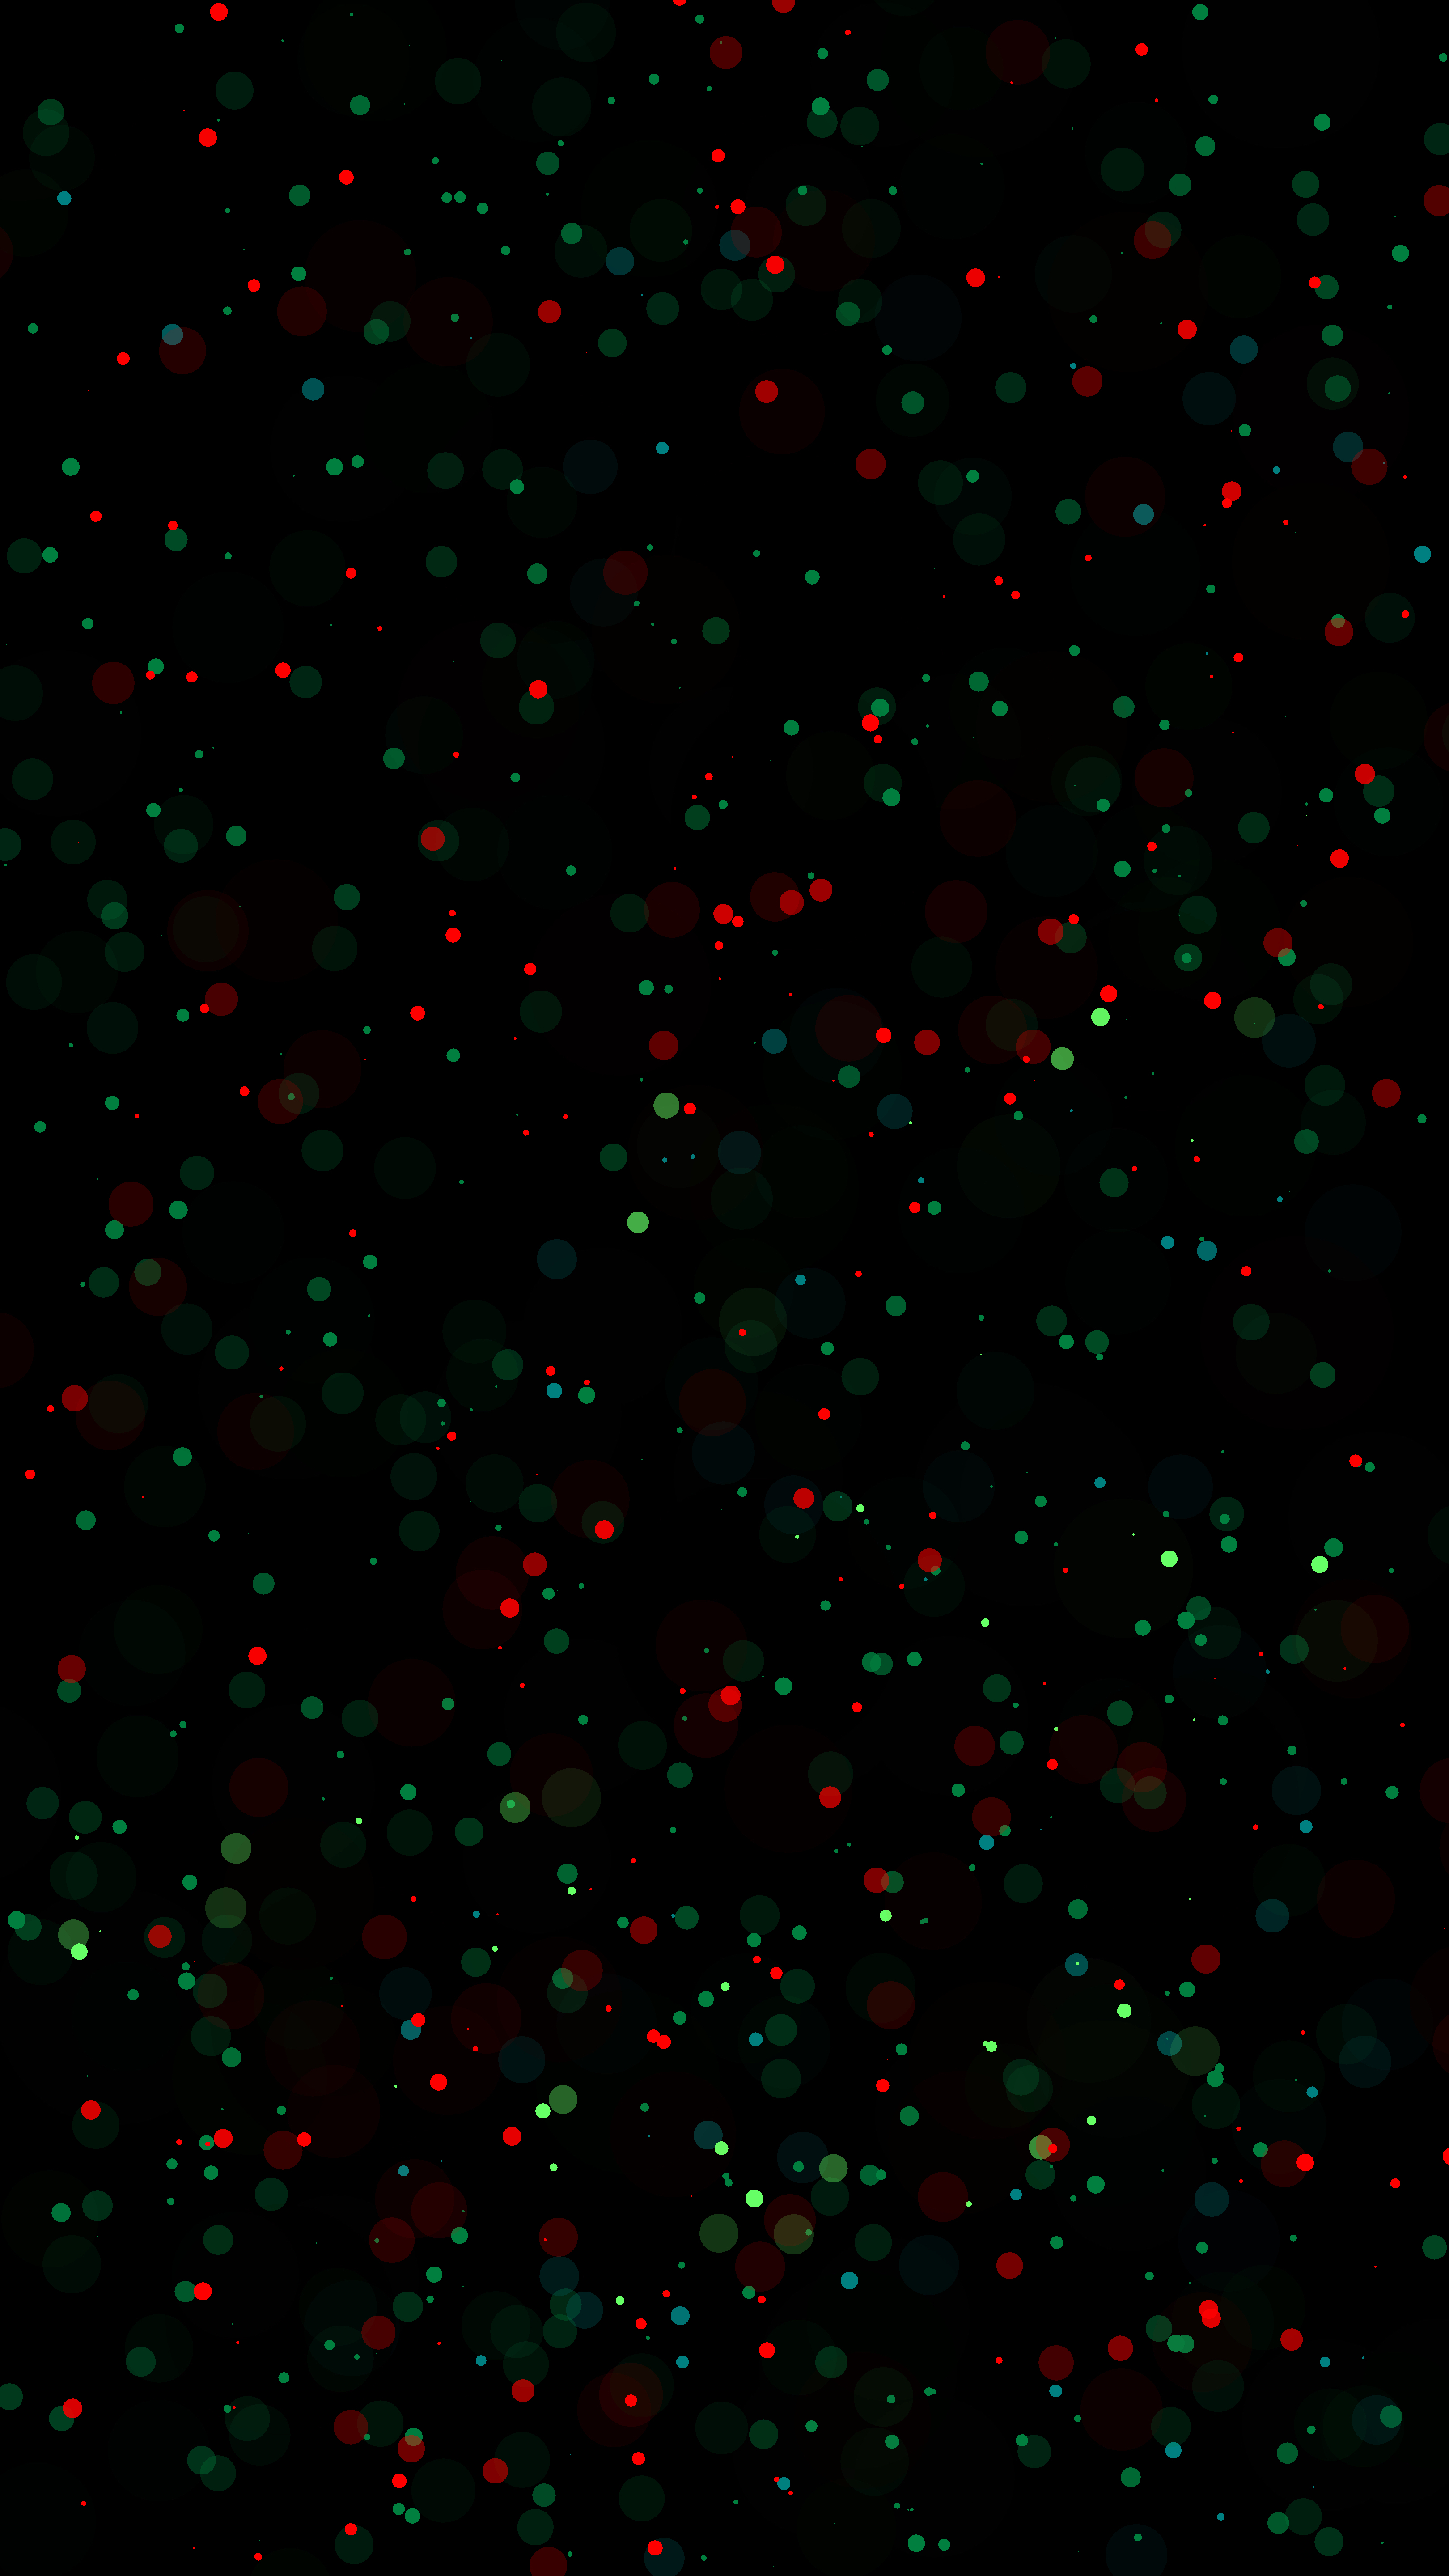 green, circles, abstract, red, glare, points, point, boquet, bokeh iphone wallpaper